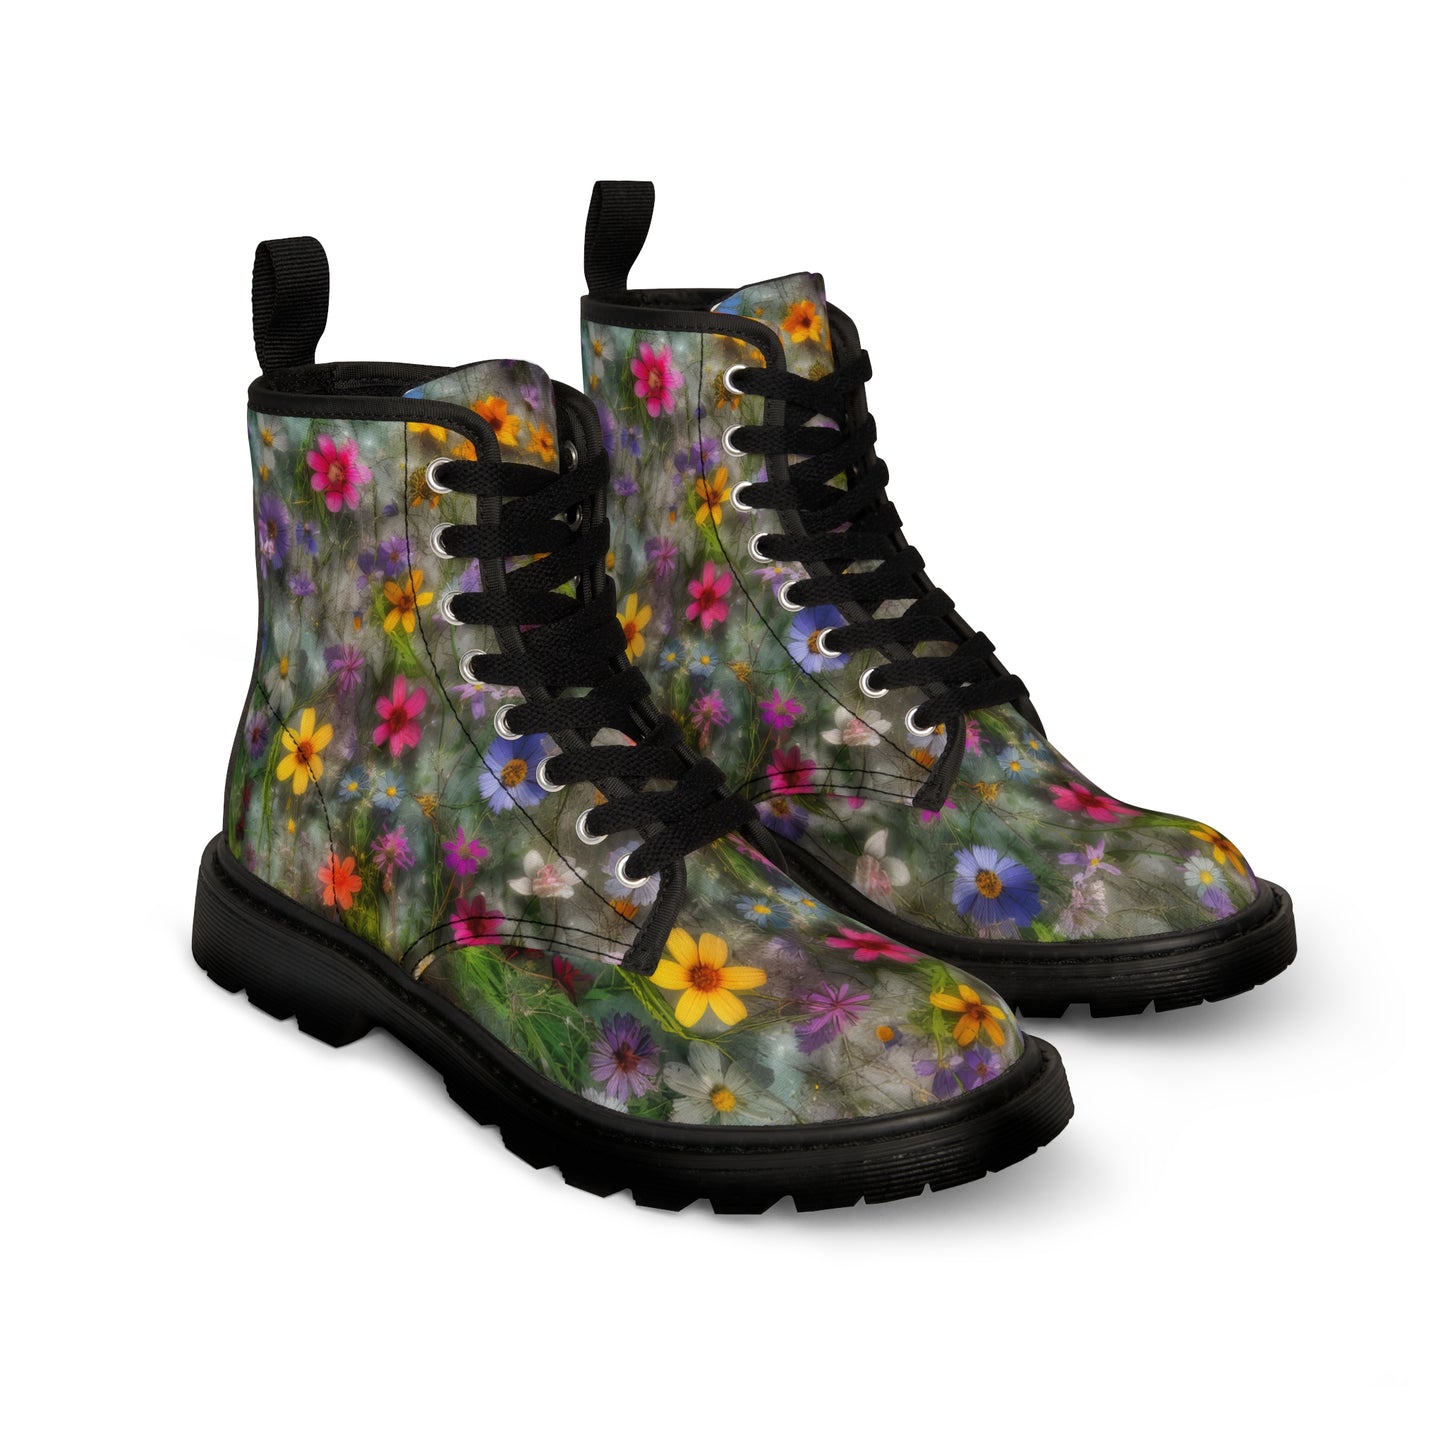 Bold & Beautiful & Metallic Wildflowers, Gorgeous floral Design, Style 2 Women's Canvas Boots